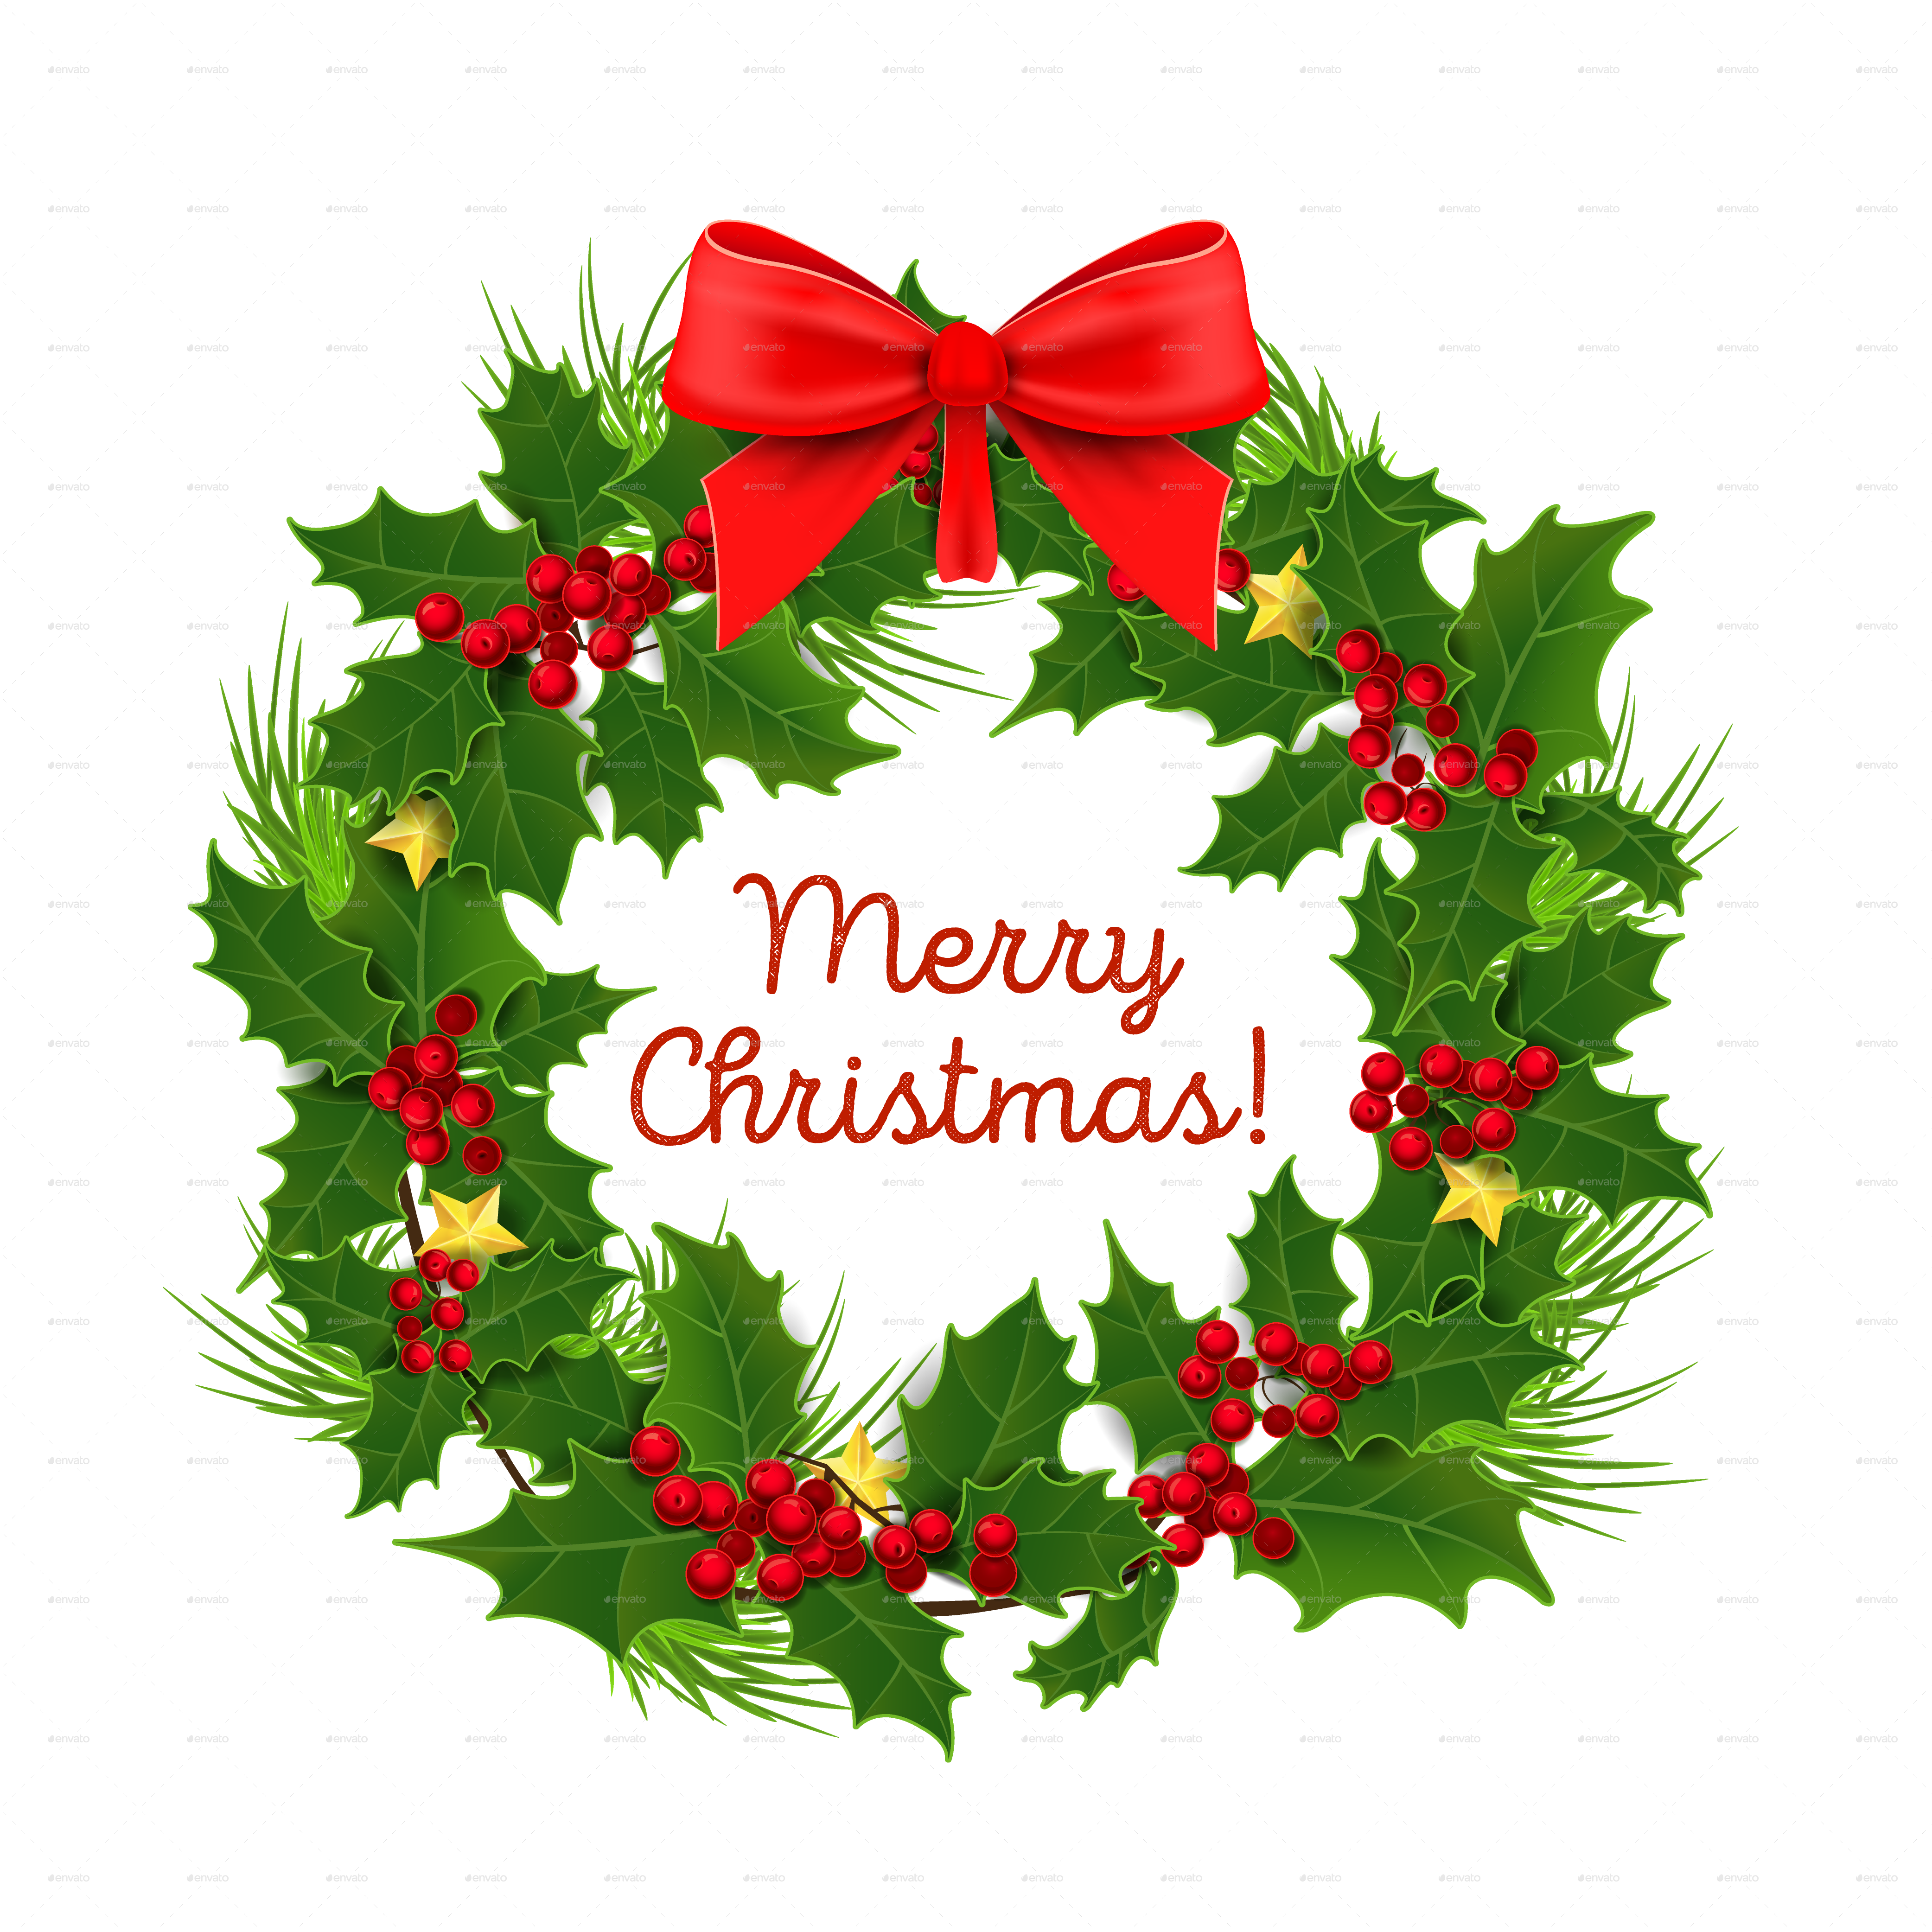 share clipart about Merry Christmas Decoration - Merry Christmas Decoration...